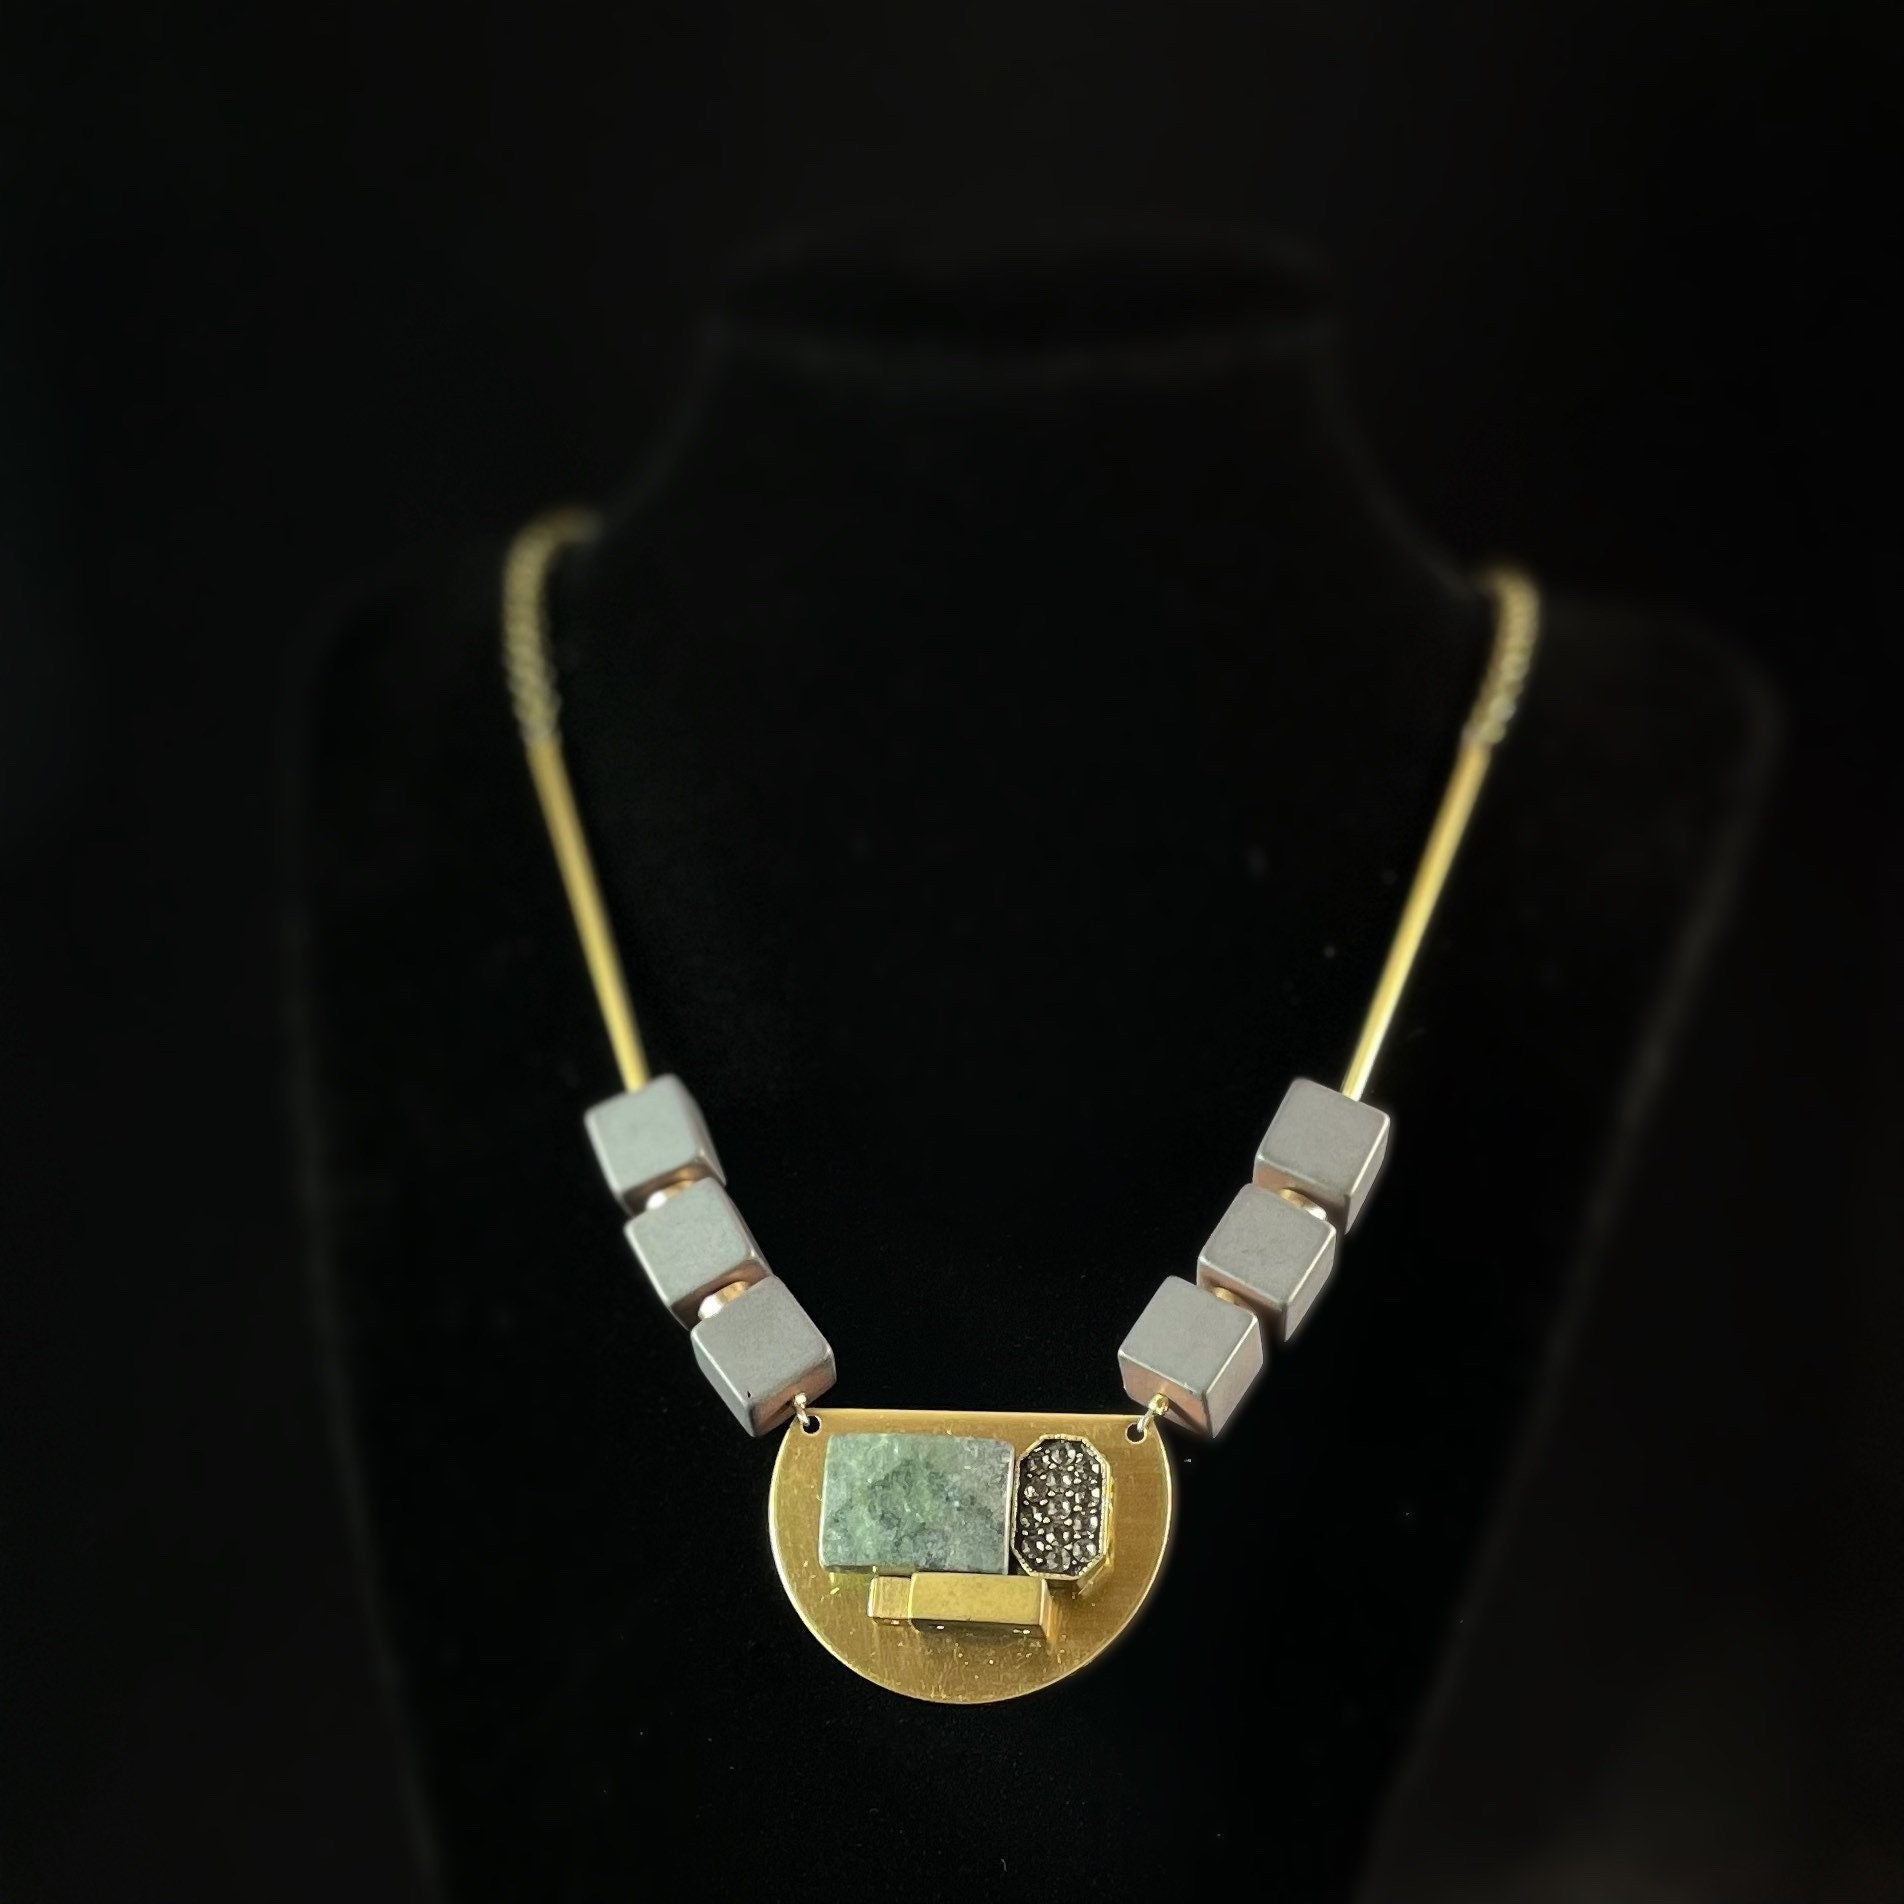 Gold, Green and Gray Geometric Art Deco Style Necklace - Black Agate, Green Marble, Hematite - David Aubrey Jewelry